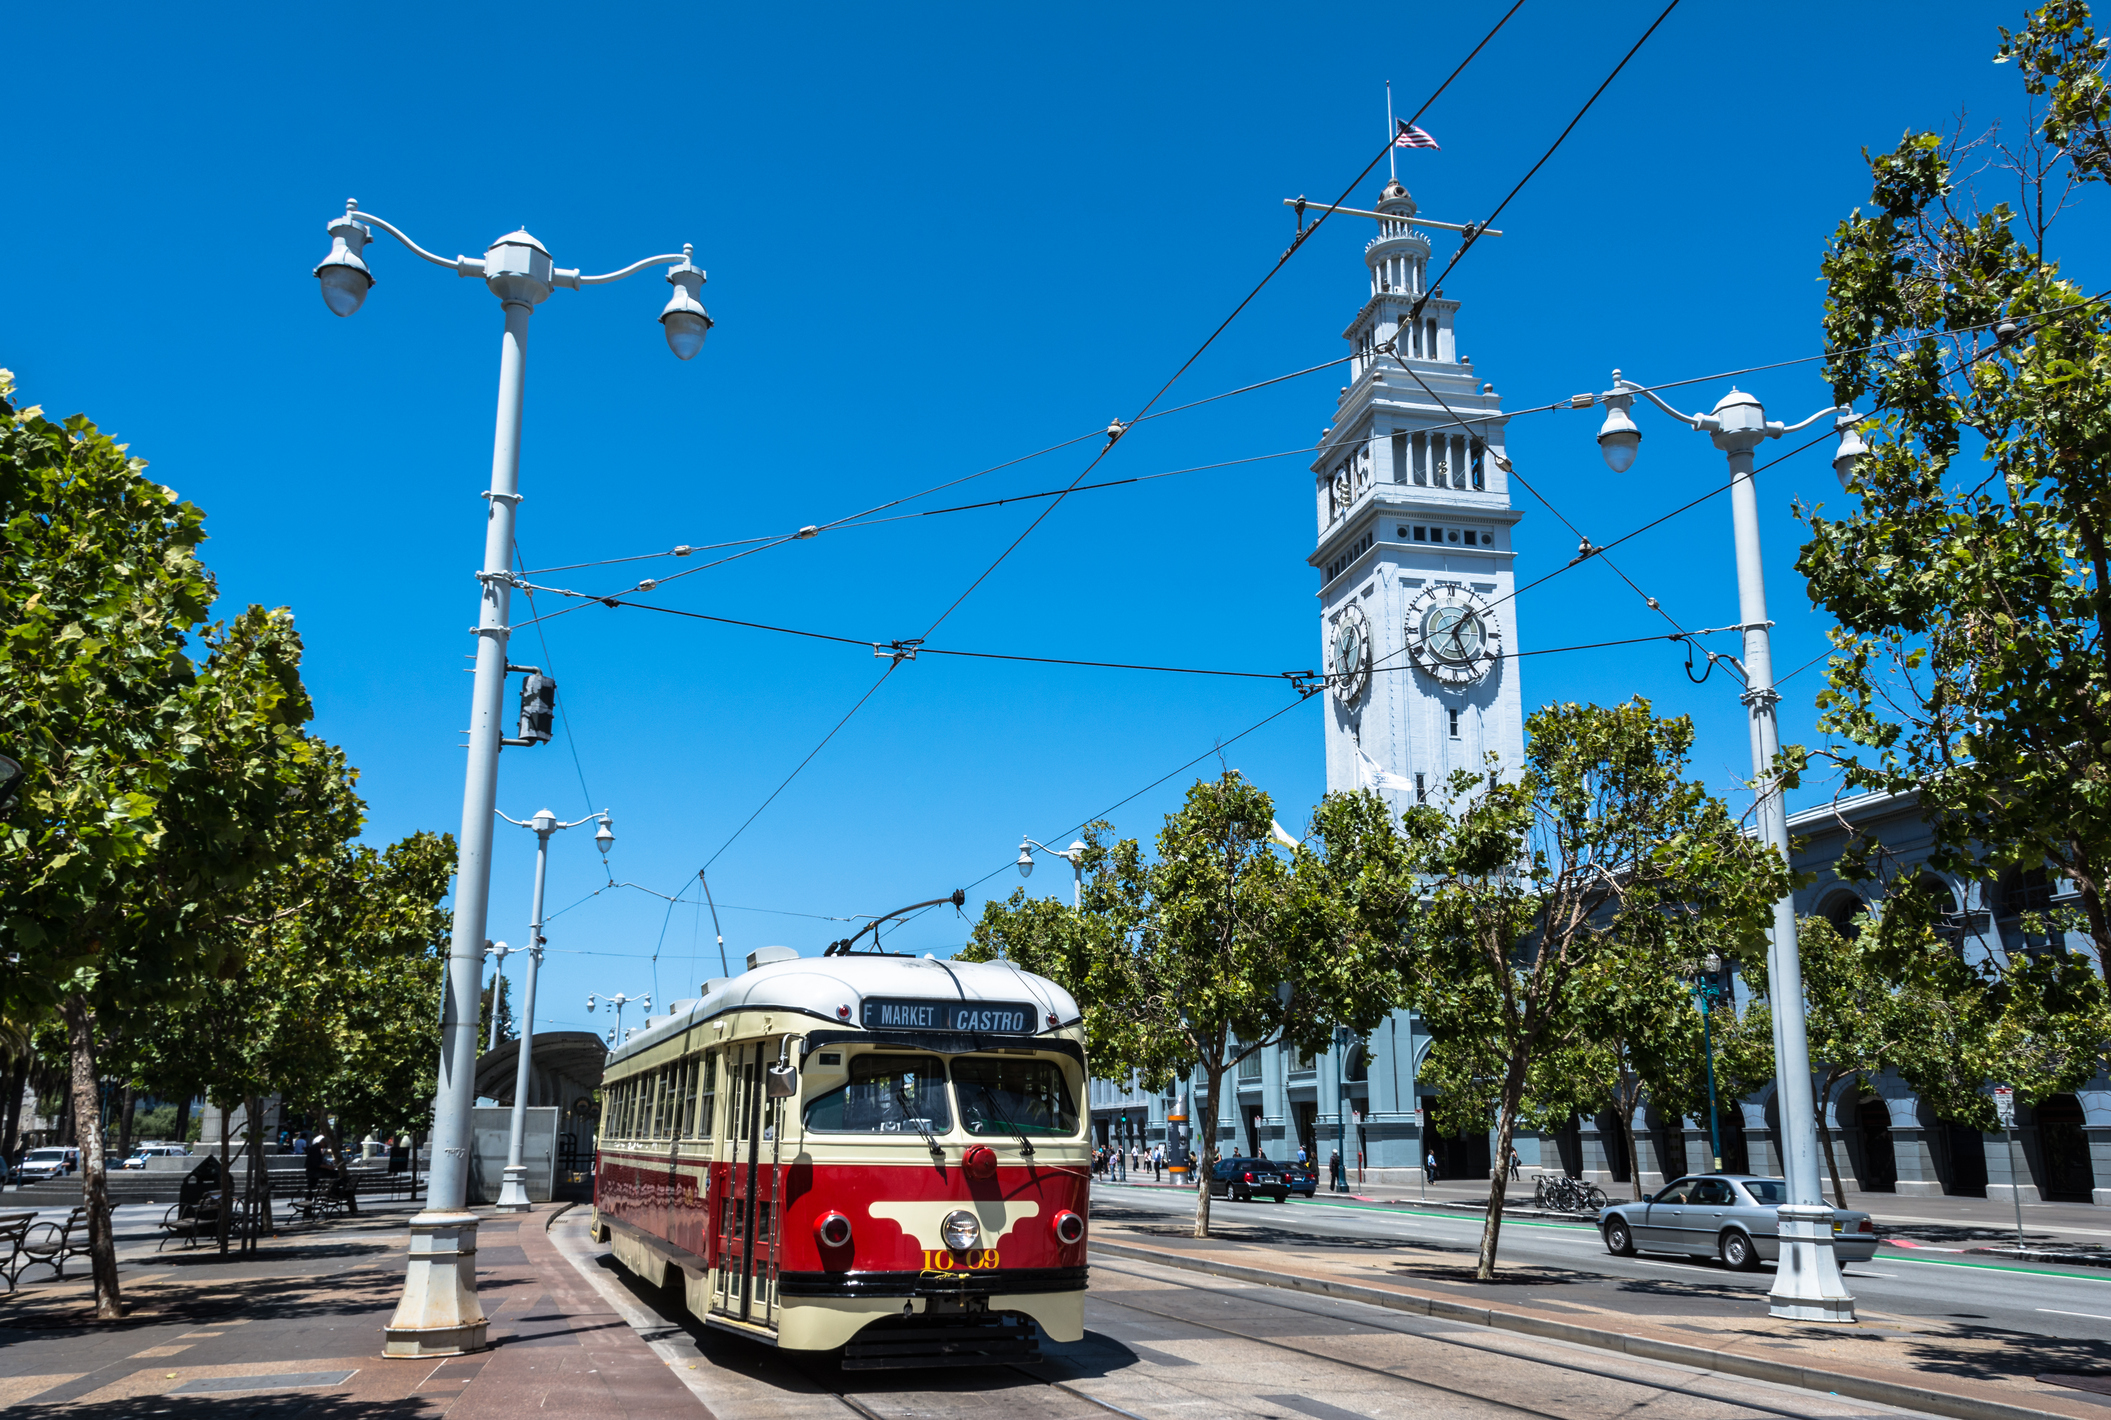 A tram passes in front of the Ferry Building Marketplace in San Francisco (Pikappa/Getty Images)